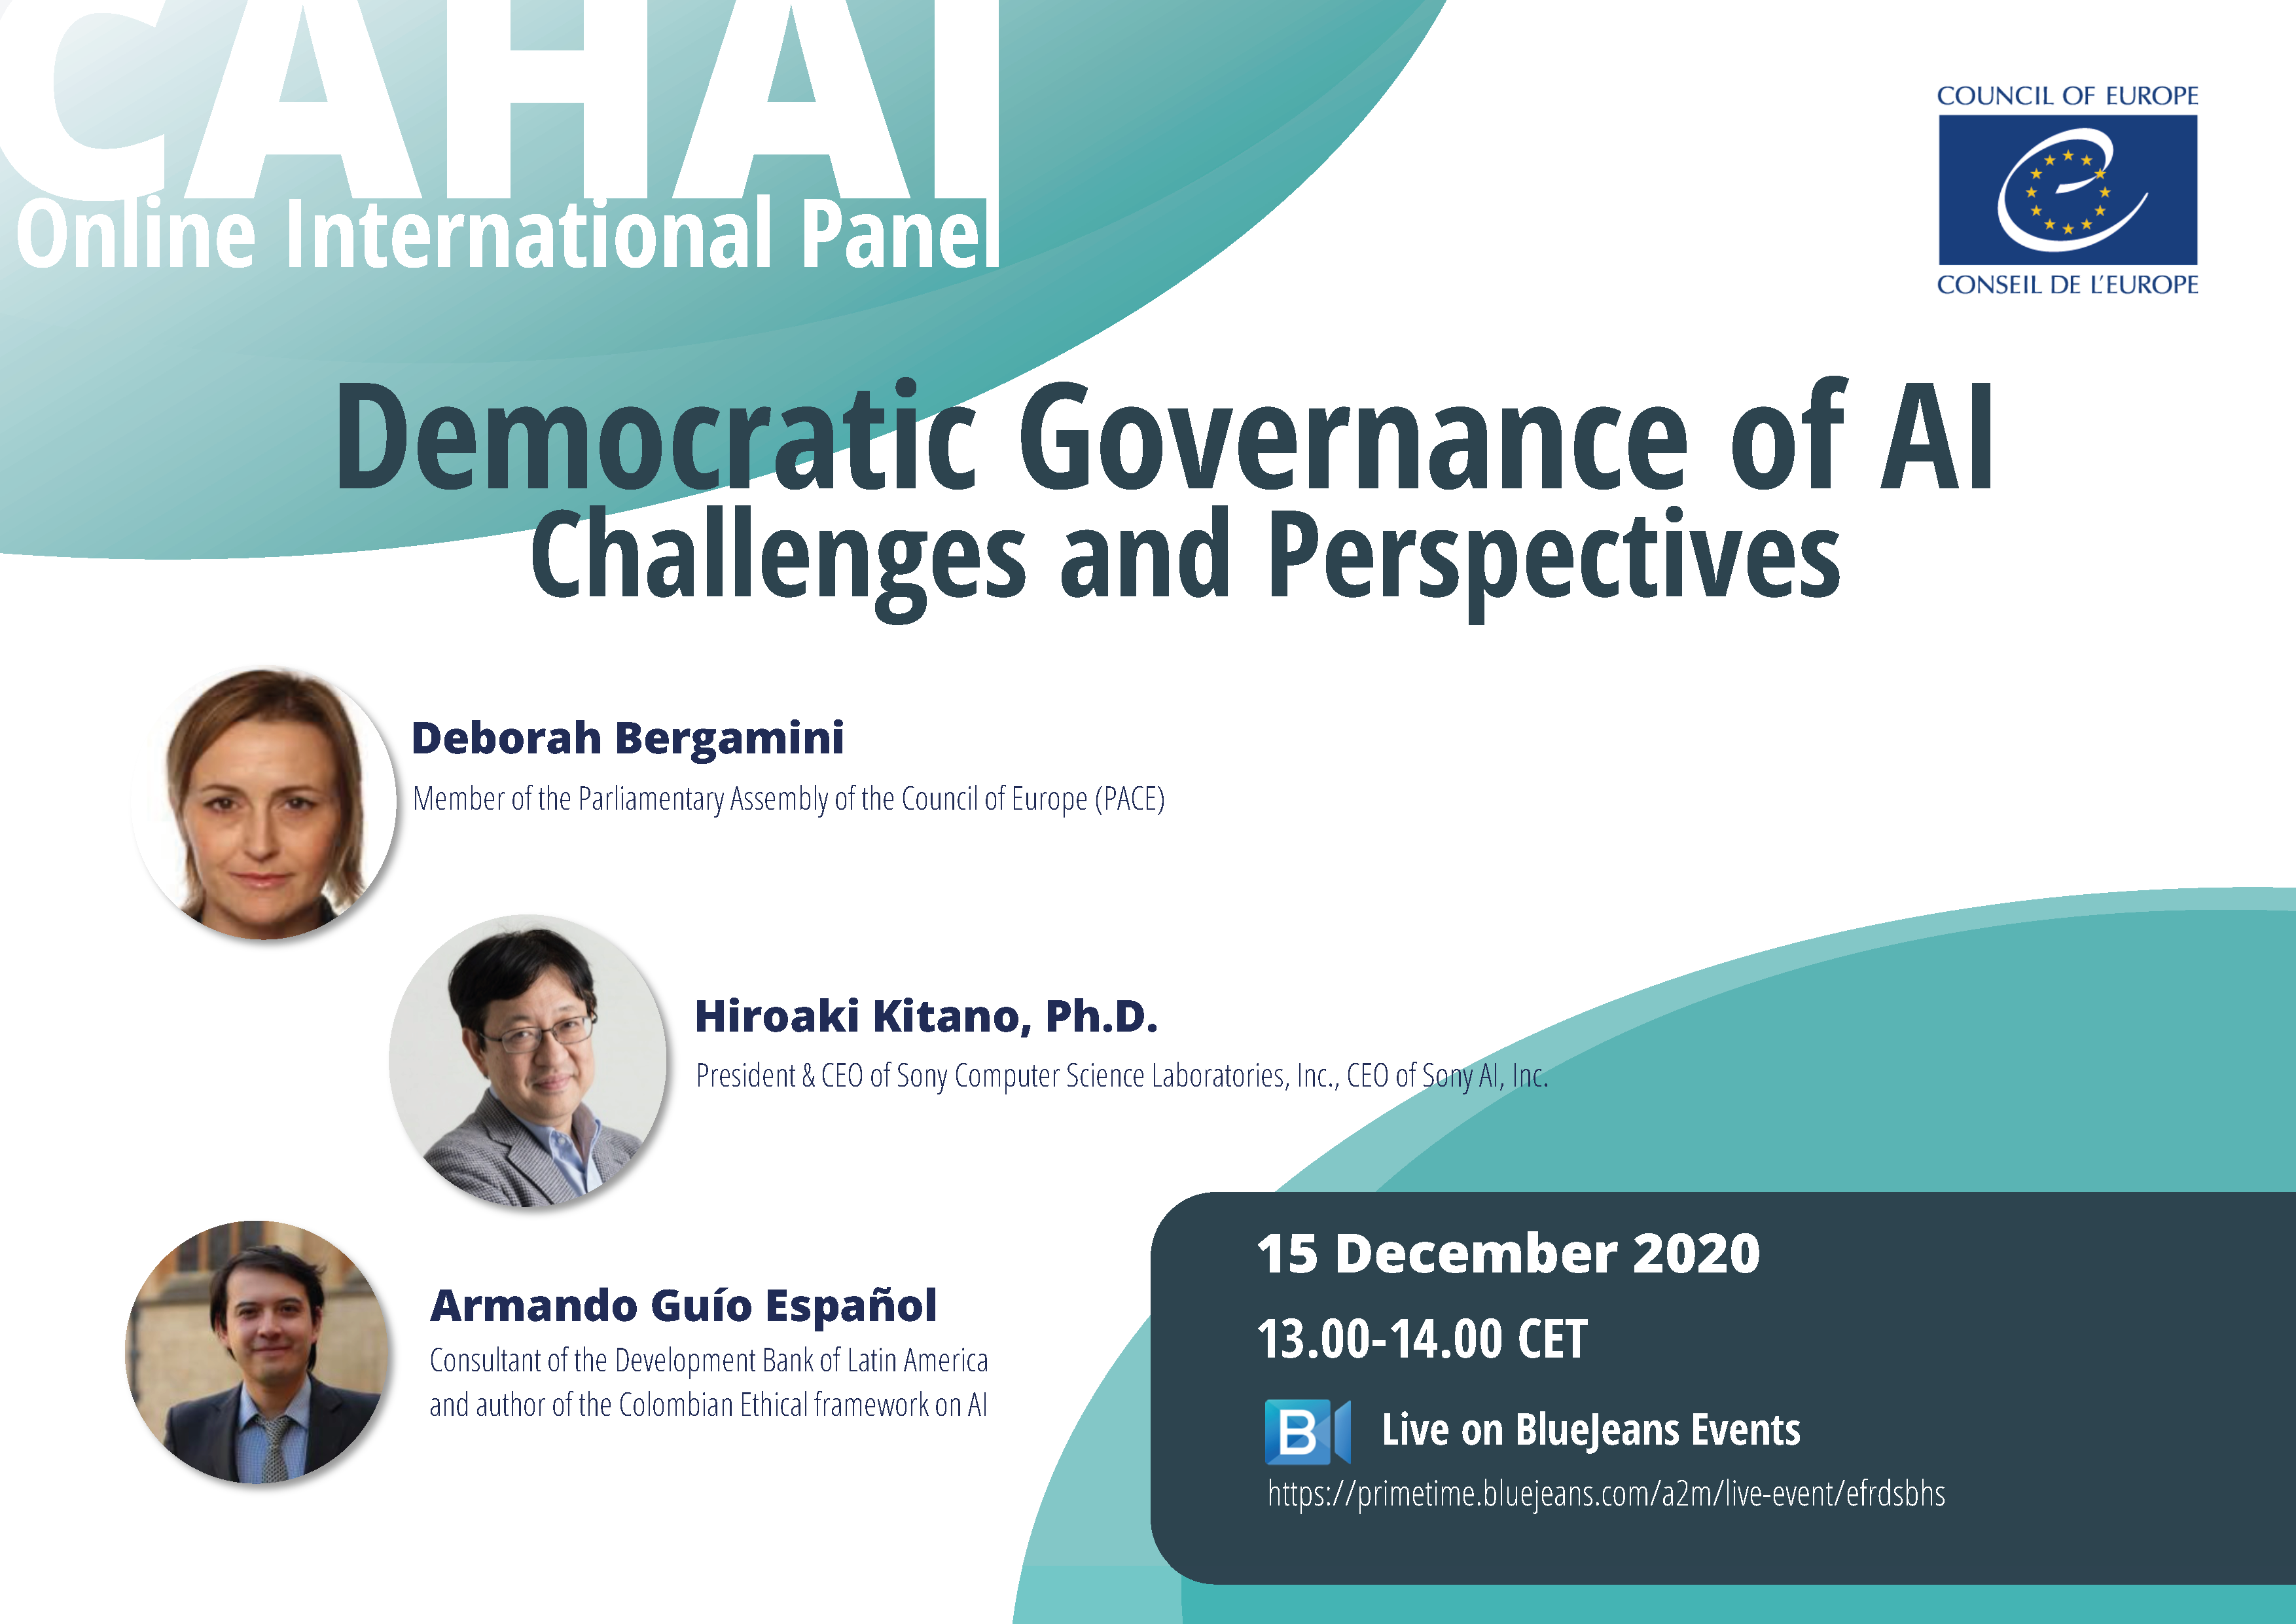 #02 - CAHAI International Panel, Democratic governance of AI: challenges and perspectives